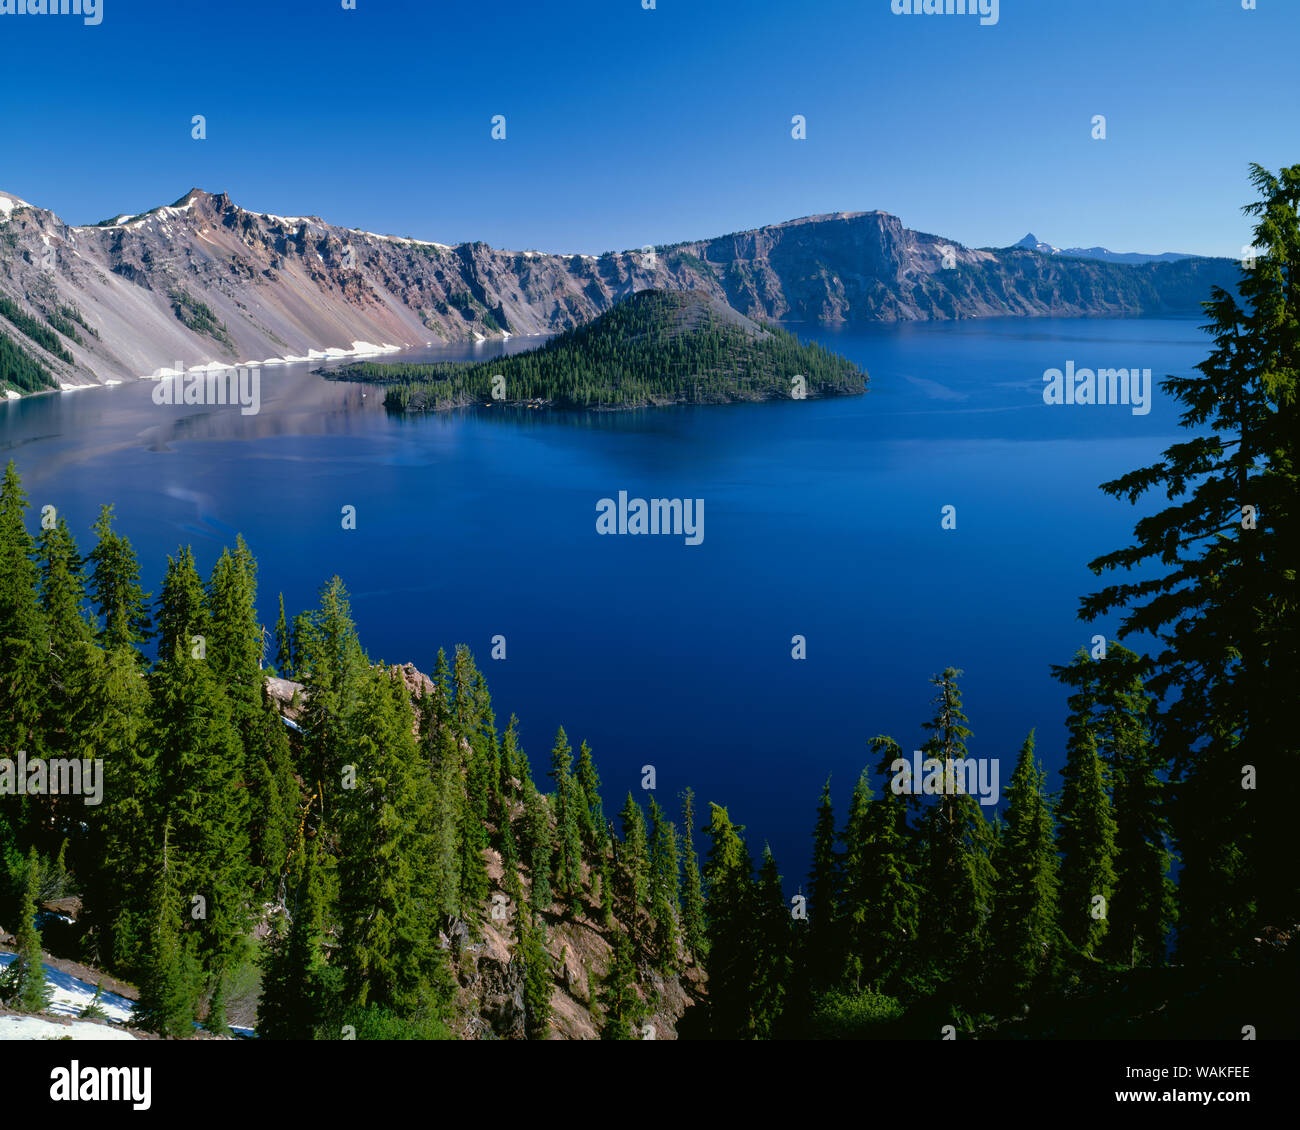 USA, Oregon. Crater Lake National Park, Wizard Island and Crater Lake with a grove of mountain hemlock on the south rim descending towards the lake. Stock Photo